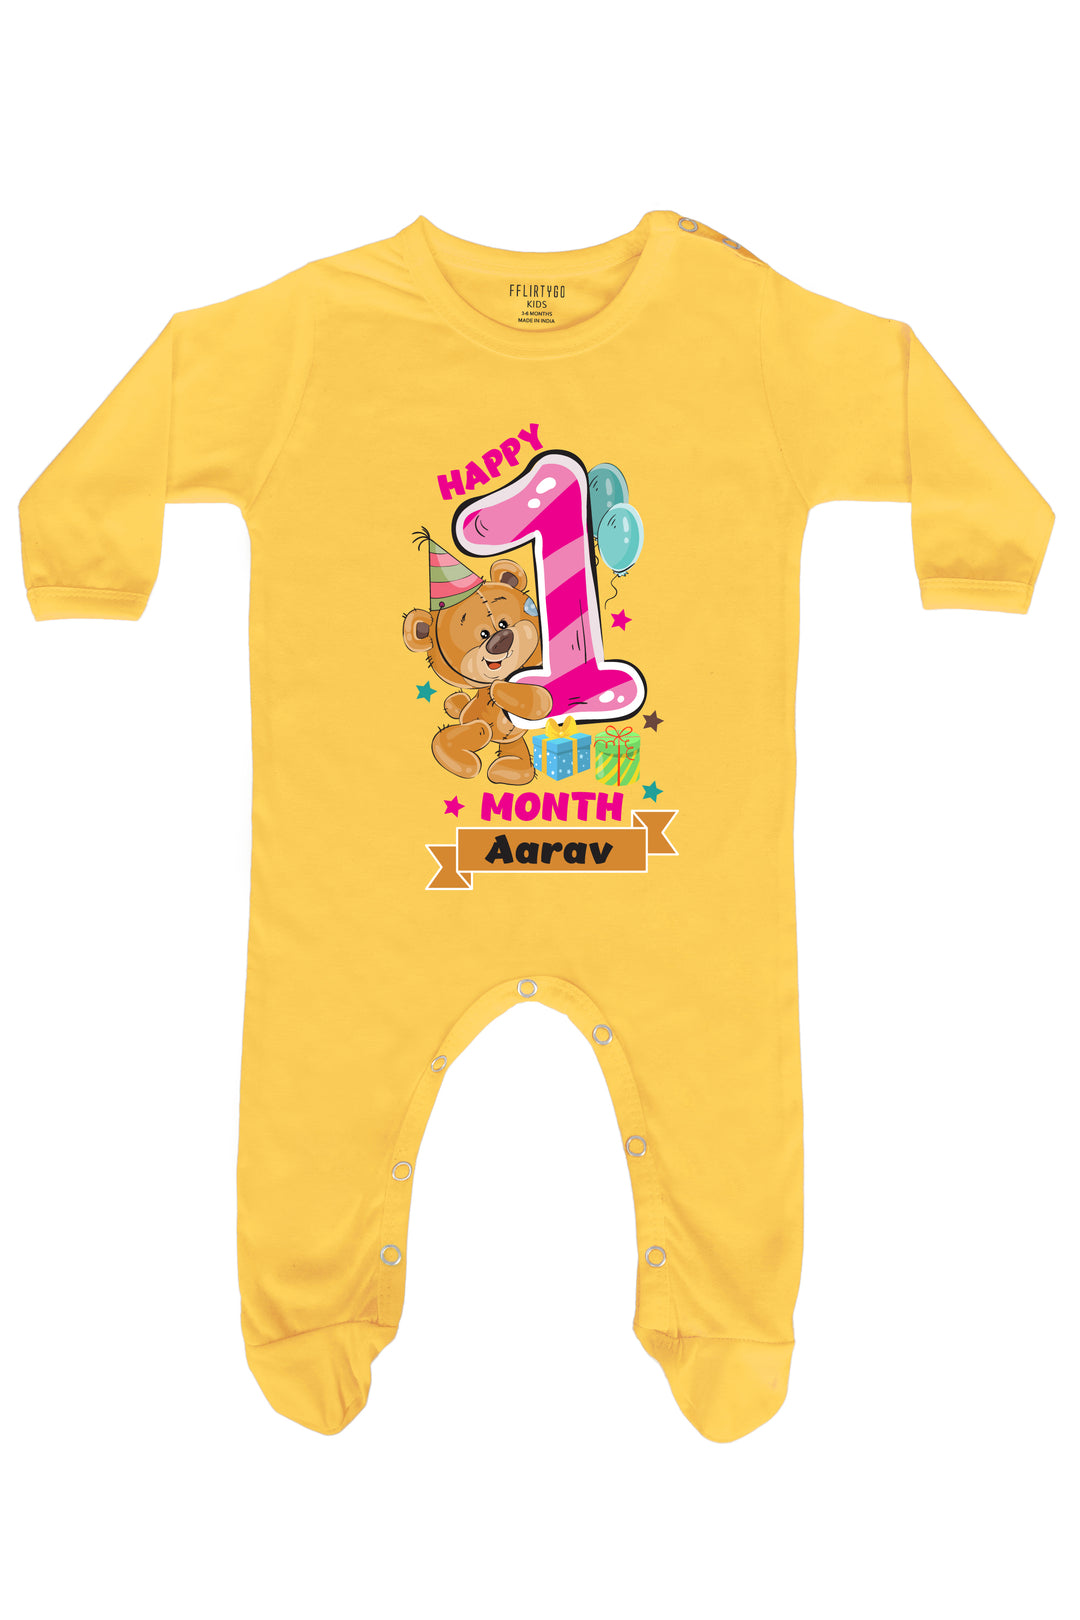 Experience the charm of our onesies and baby rompers at Fflirtygo. From adorable baby rompers to unisex newborn onesies, explore our collection. Discover yellow newborn romper options and stylish jumpsuits for infants. Capture monthly milestones with our cute new born babysuits